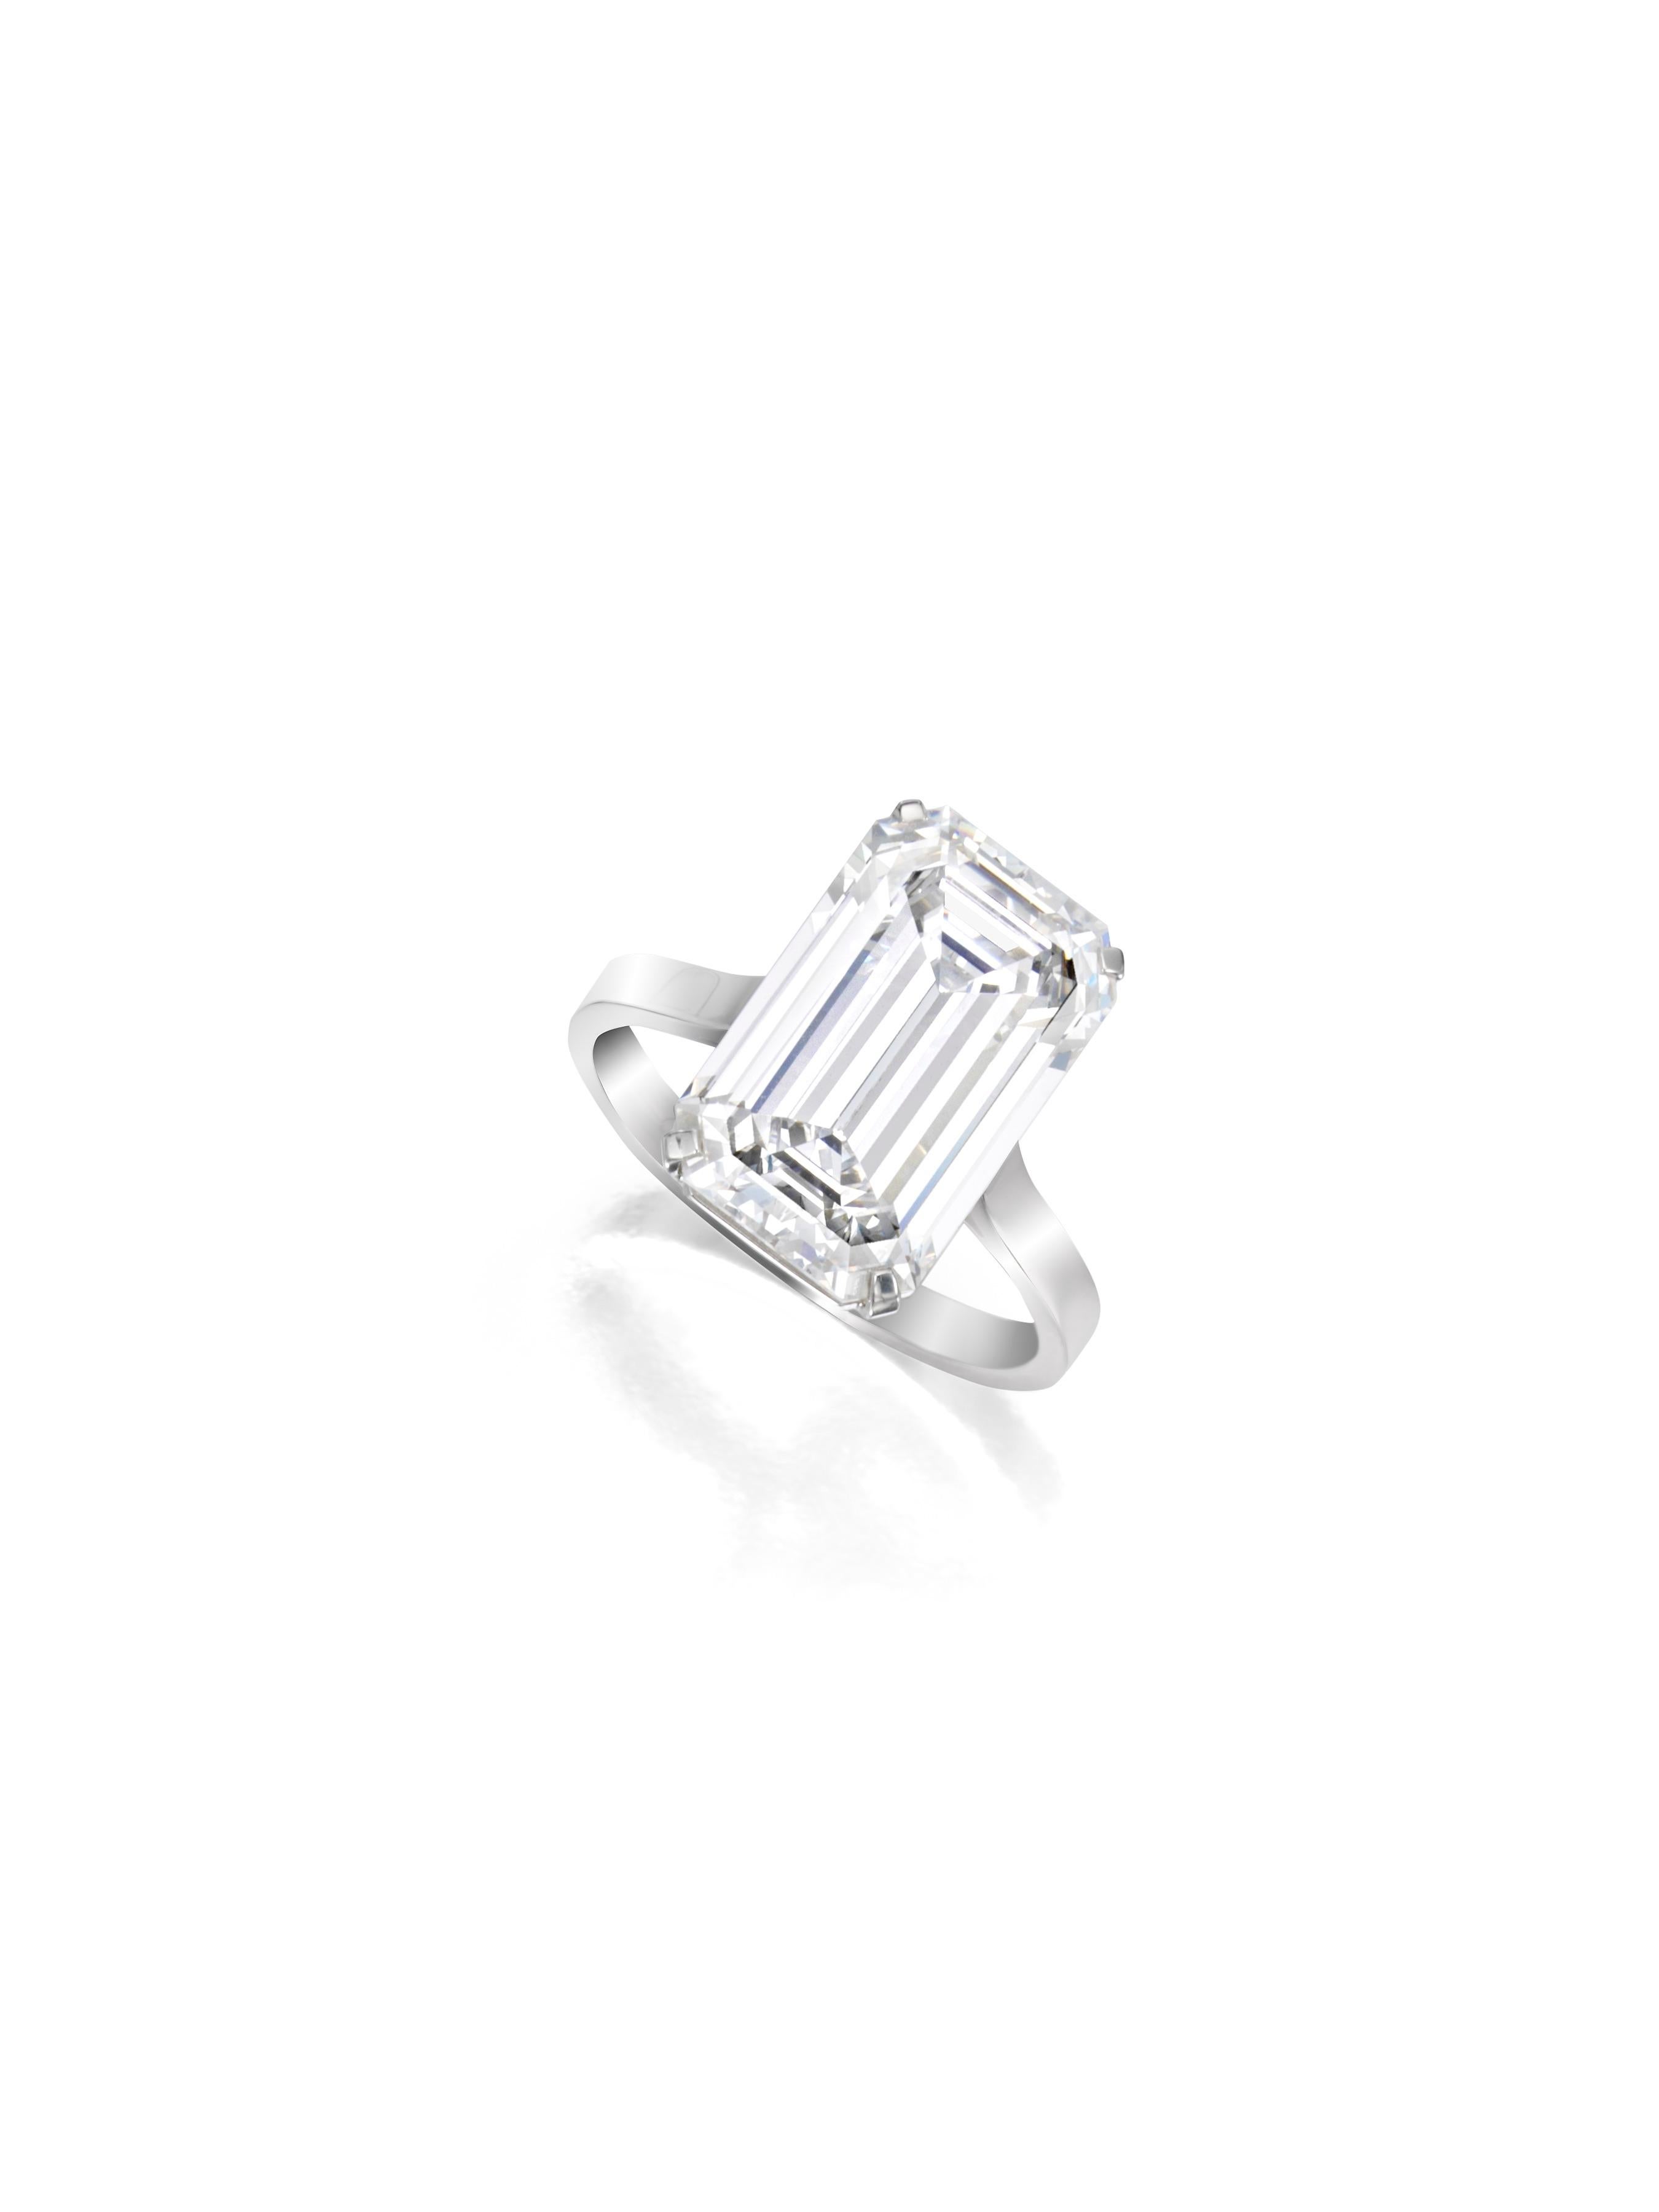 Antinori Fine Jewels is proud to offer this important and impressive 4 carat GIA certified Internally Flawless E Color Emerald cut diamond ring. The ring consists of one emerald cut diamond weighing 4 carat accompanied by a GIA report.

The main